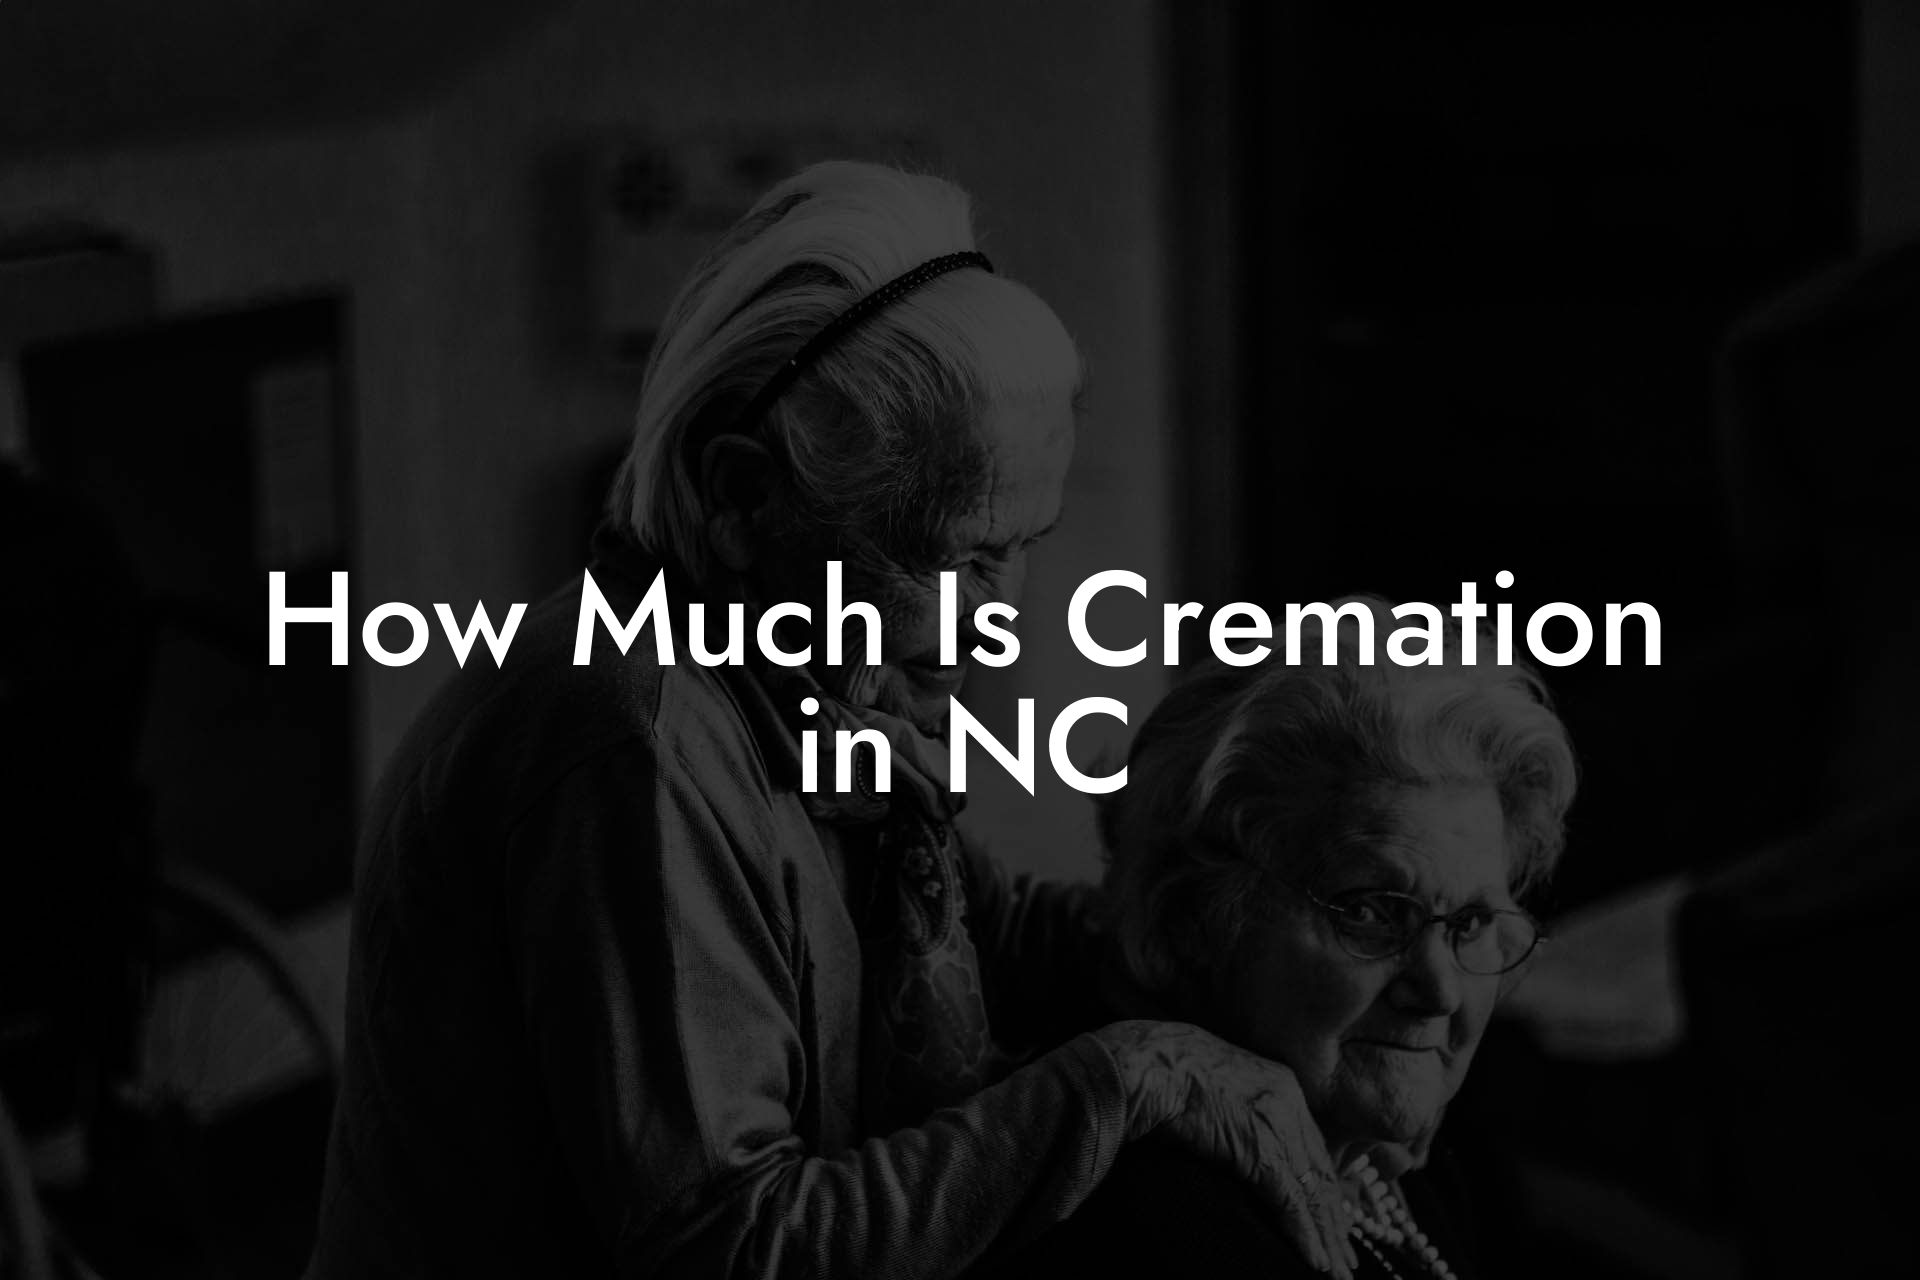 How Much Is Cremation in NC